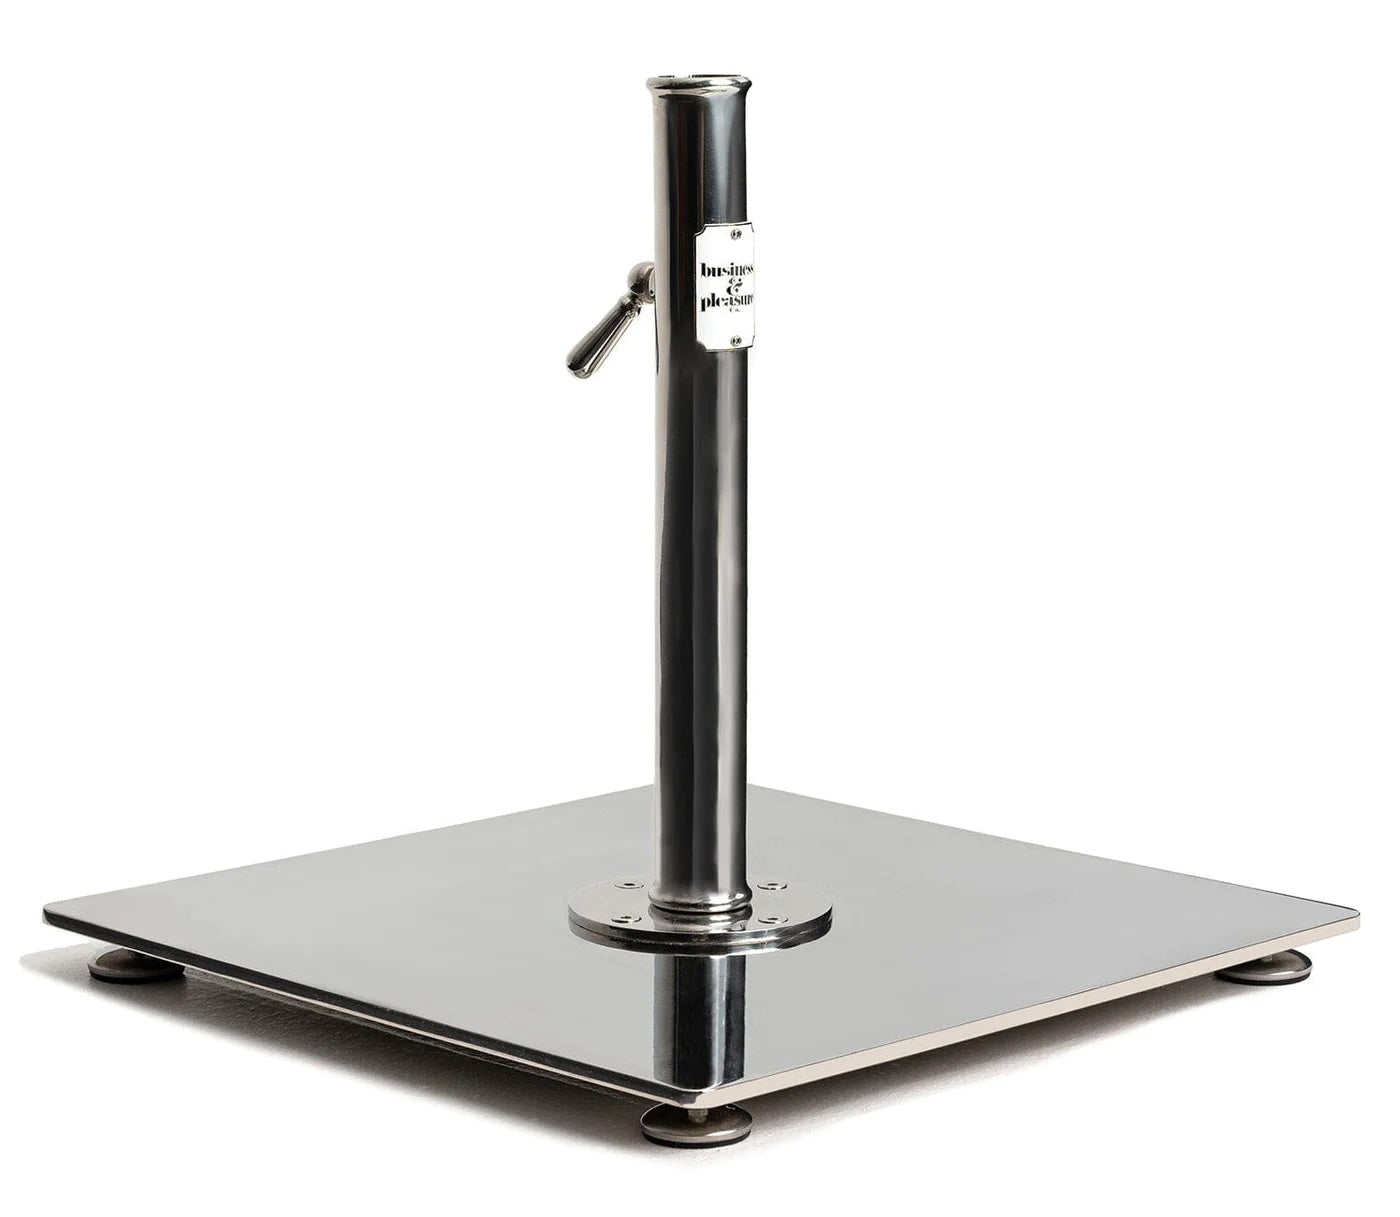 Stainless Steel Base - 55lbs